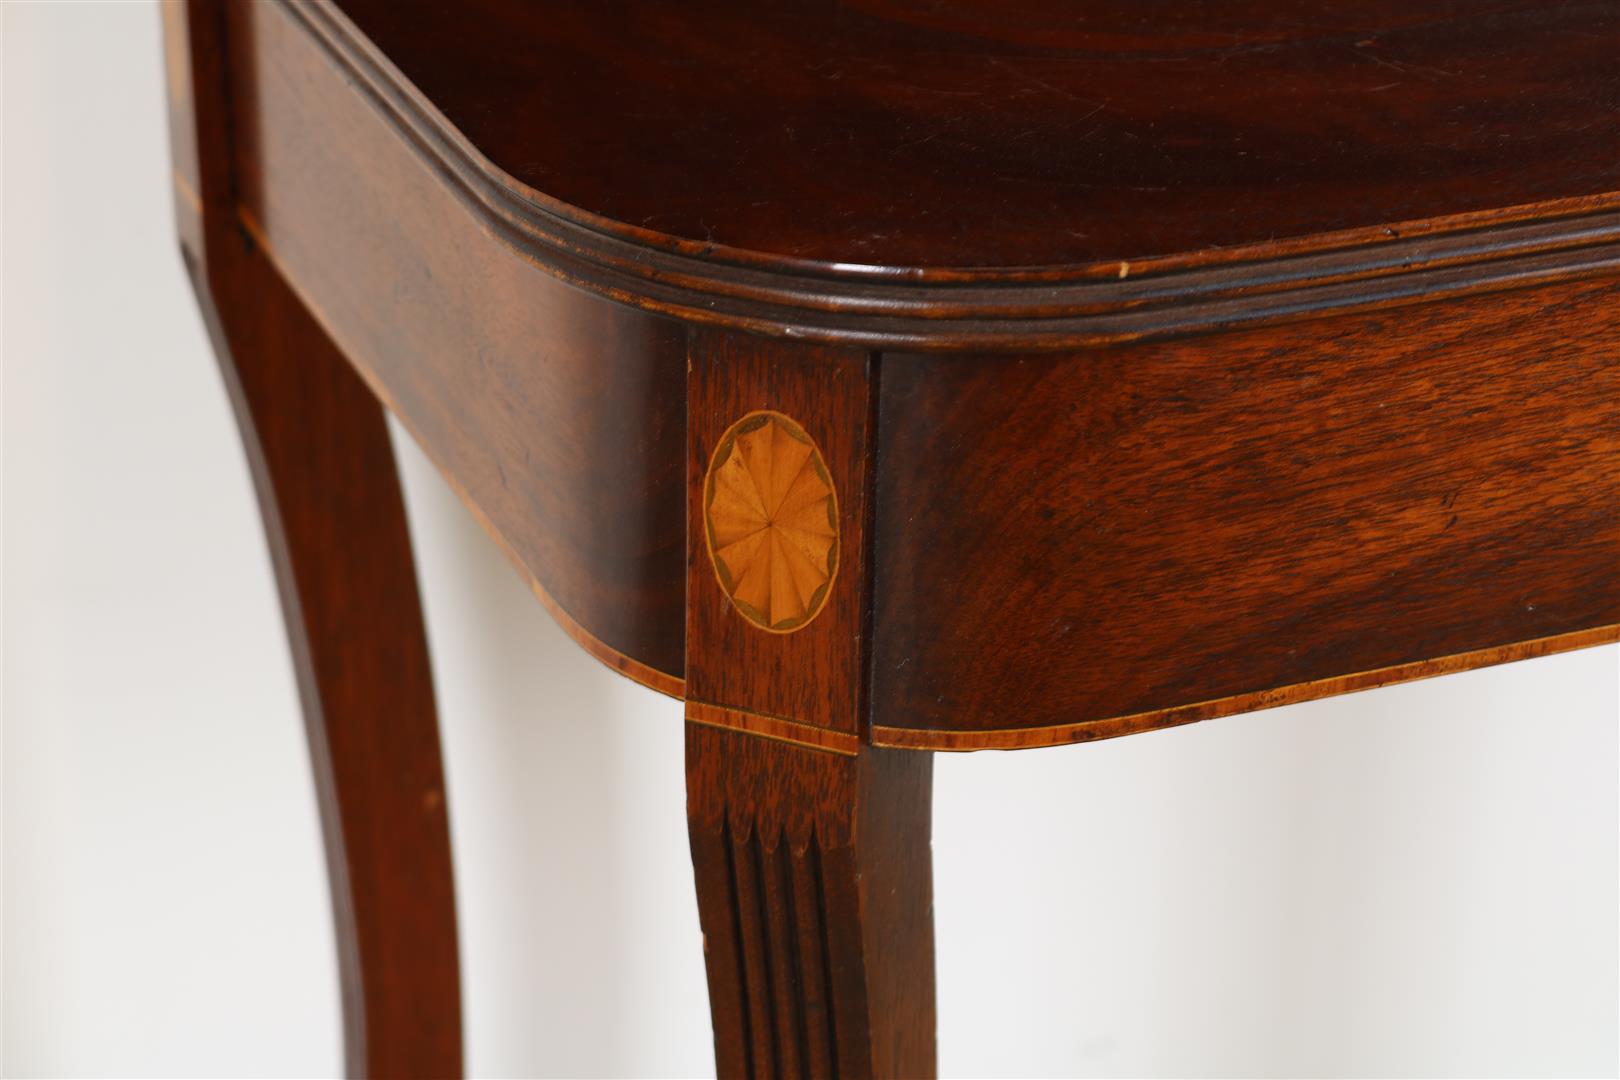 Mahogany Georgian-style coffee/breakfast table with folding top, inlaid vase in skirting boards - Image 5 of 6